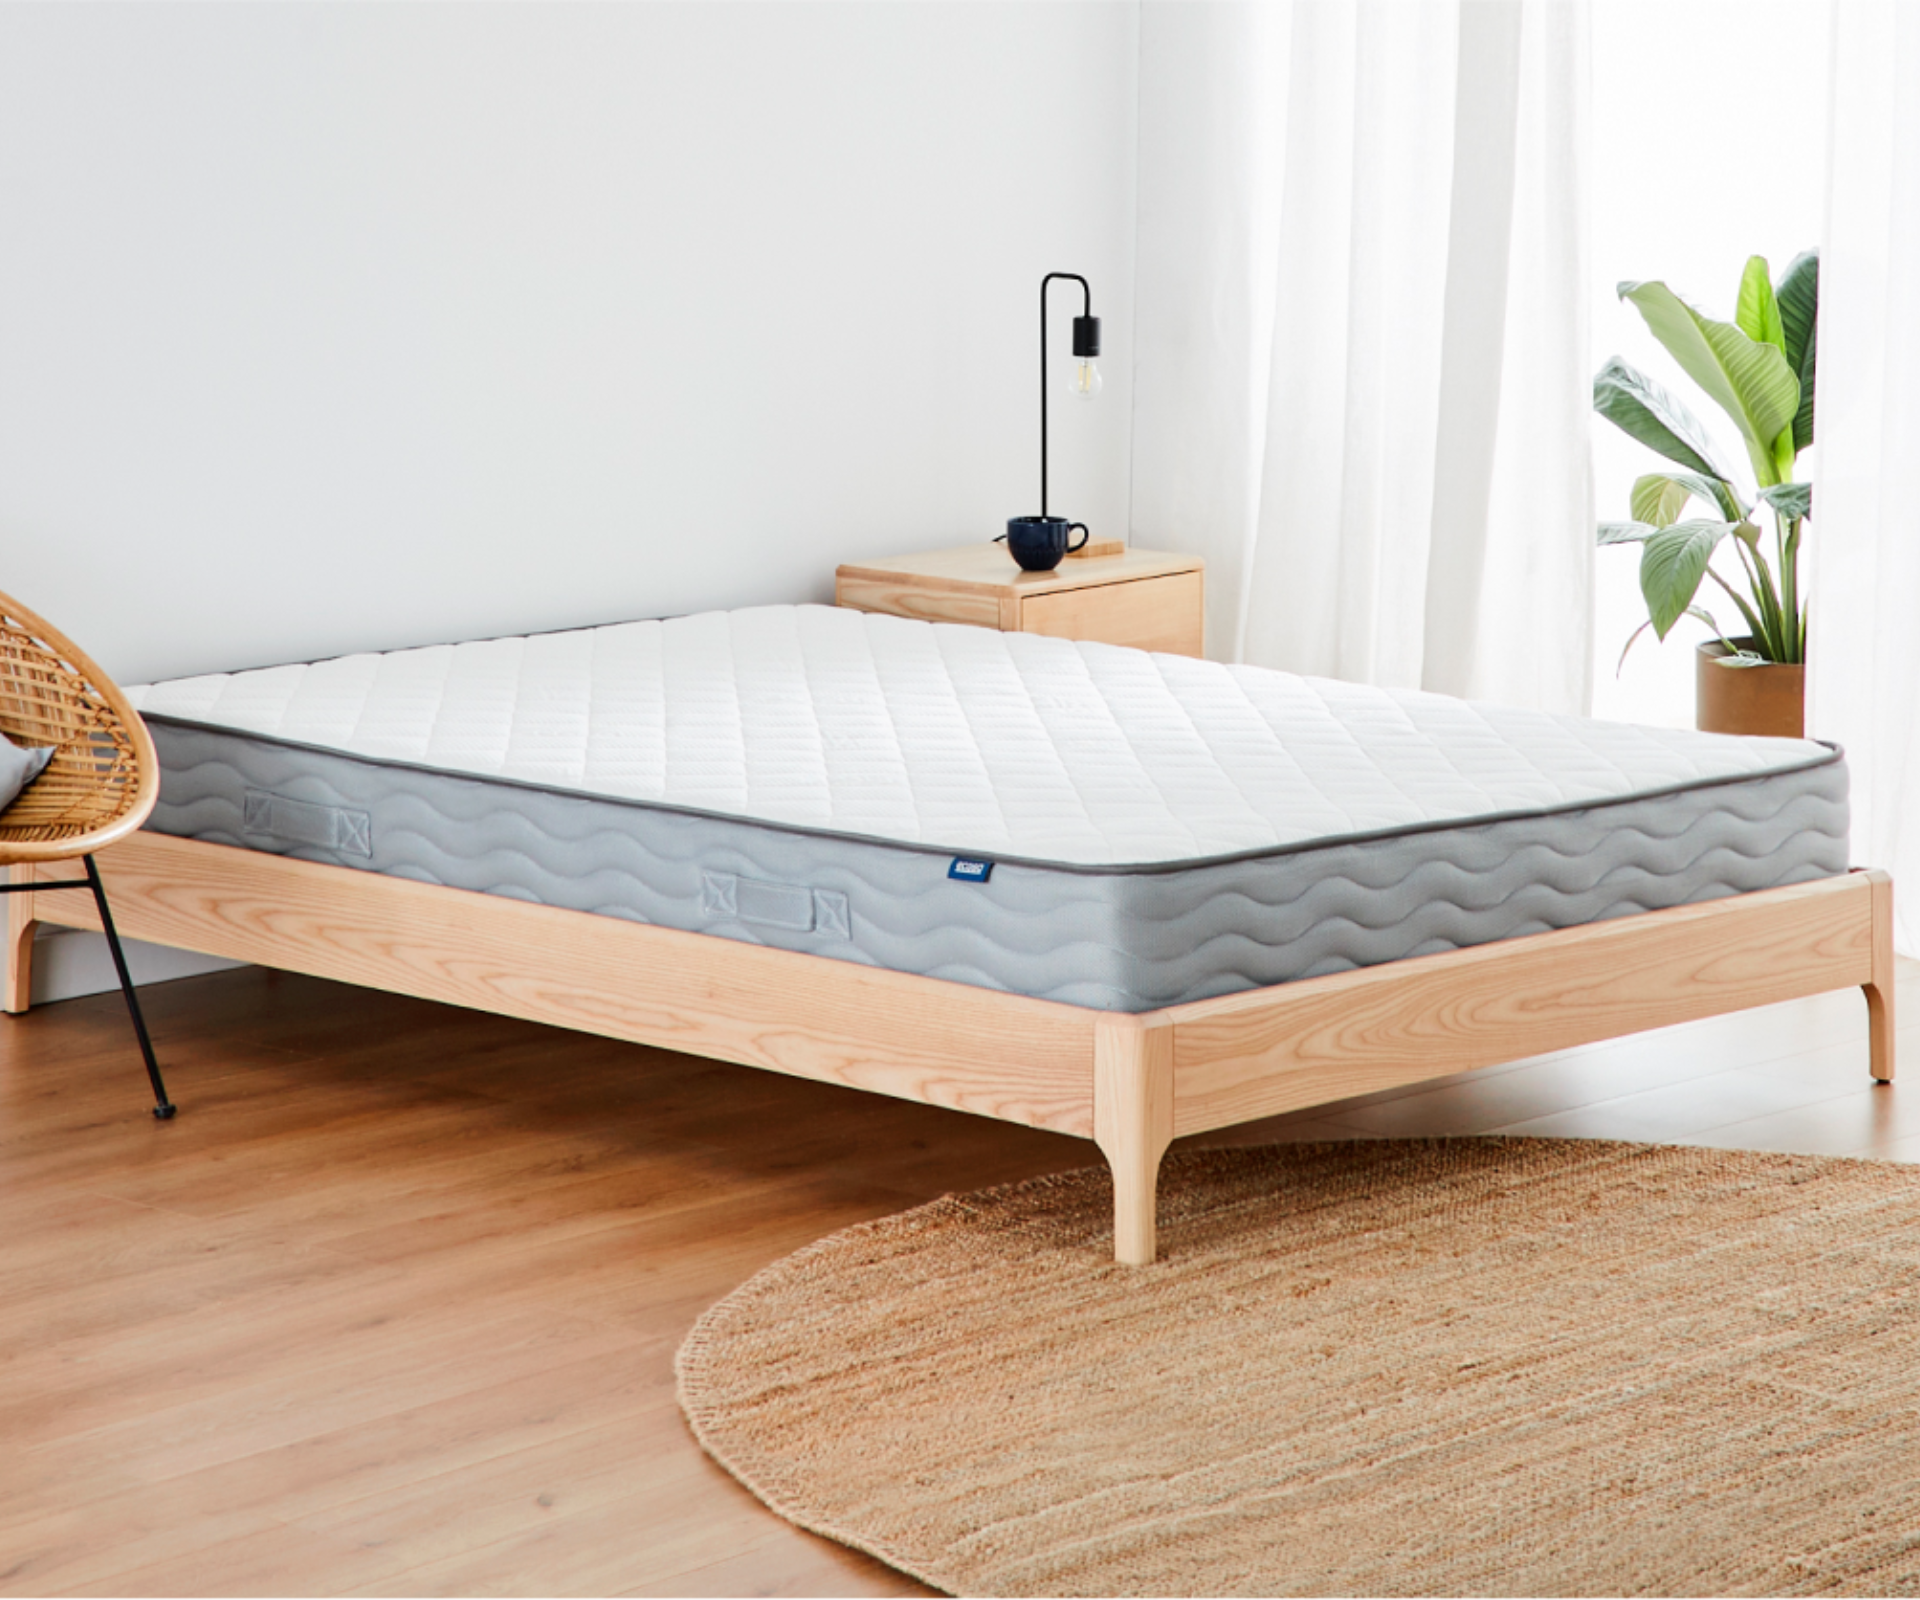 Align firm mattress by Ecosa in bedroom